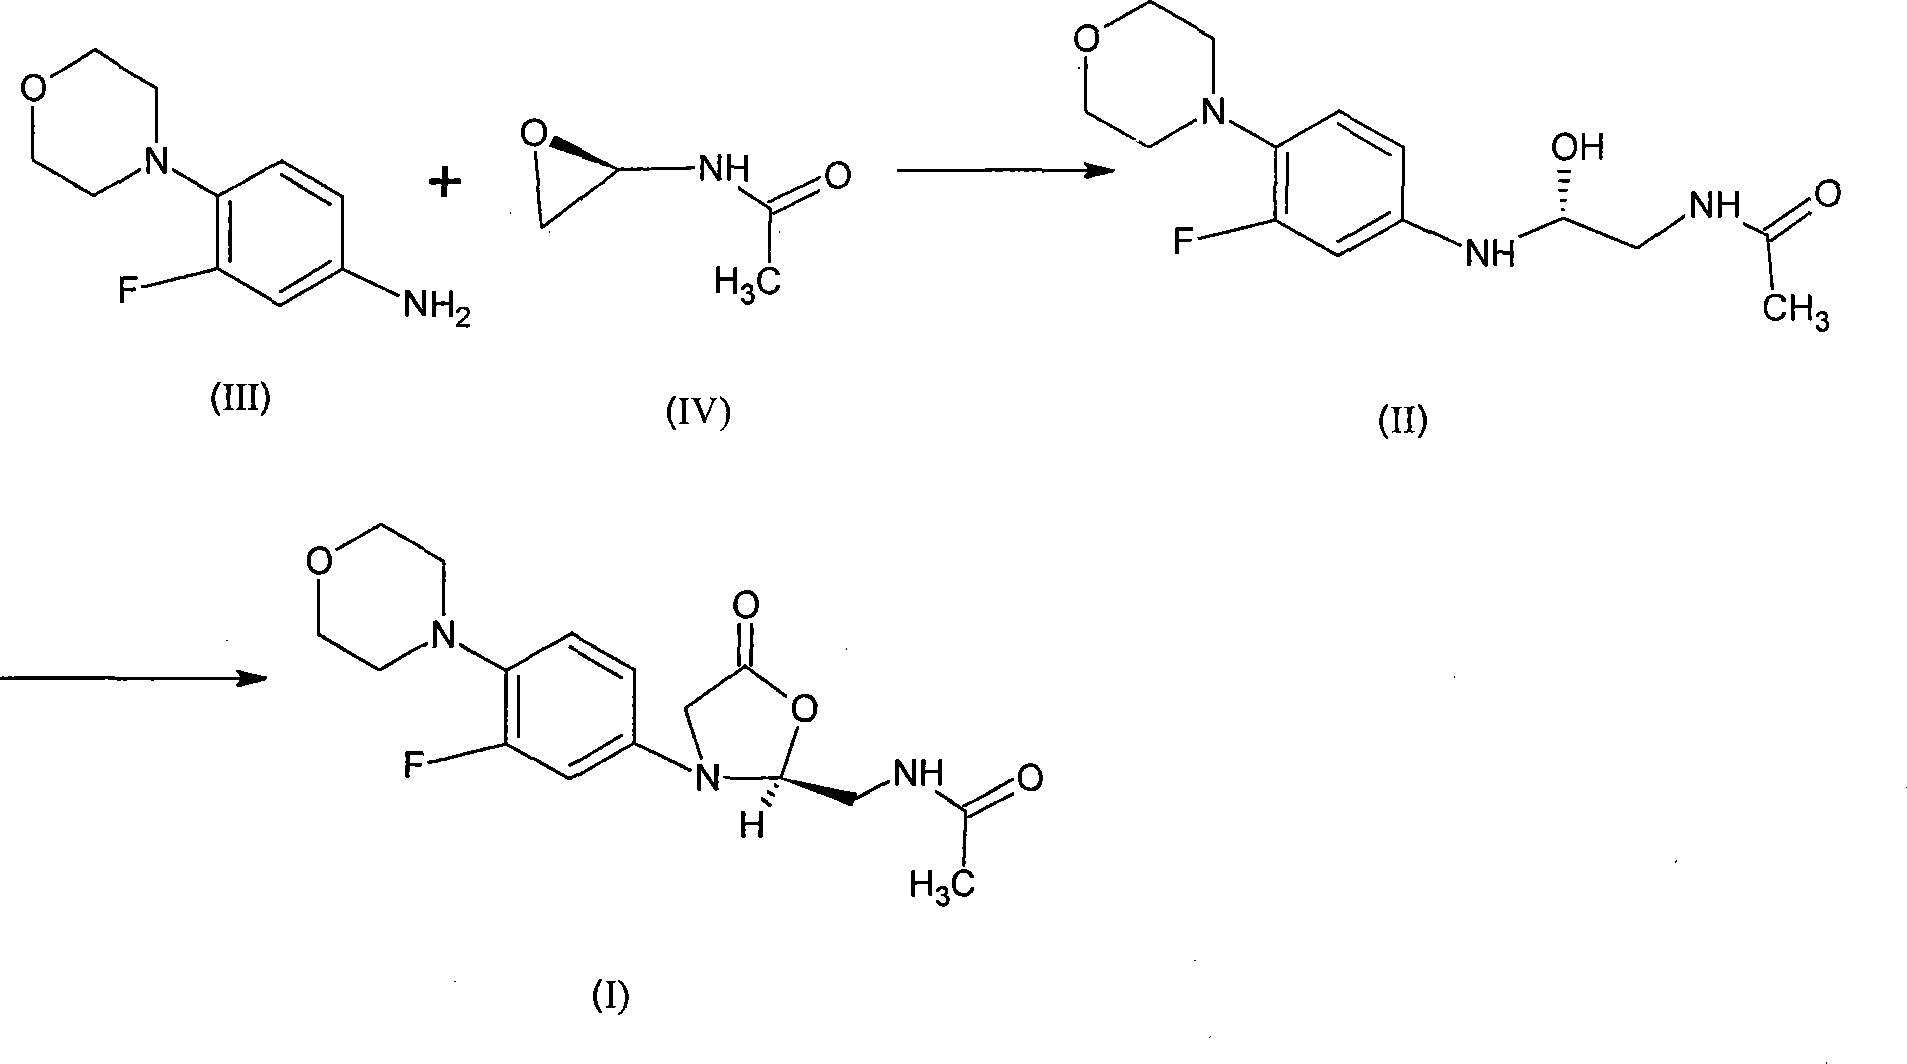 Synthesis of linezolid